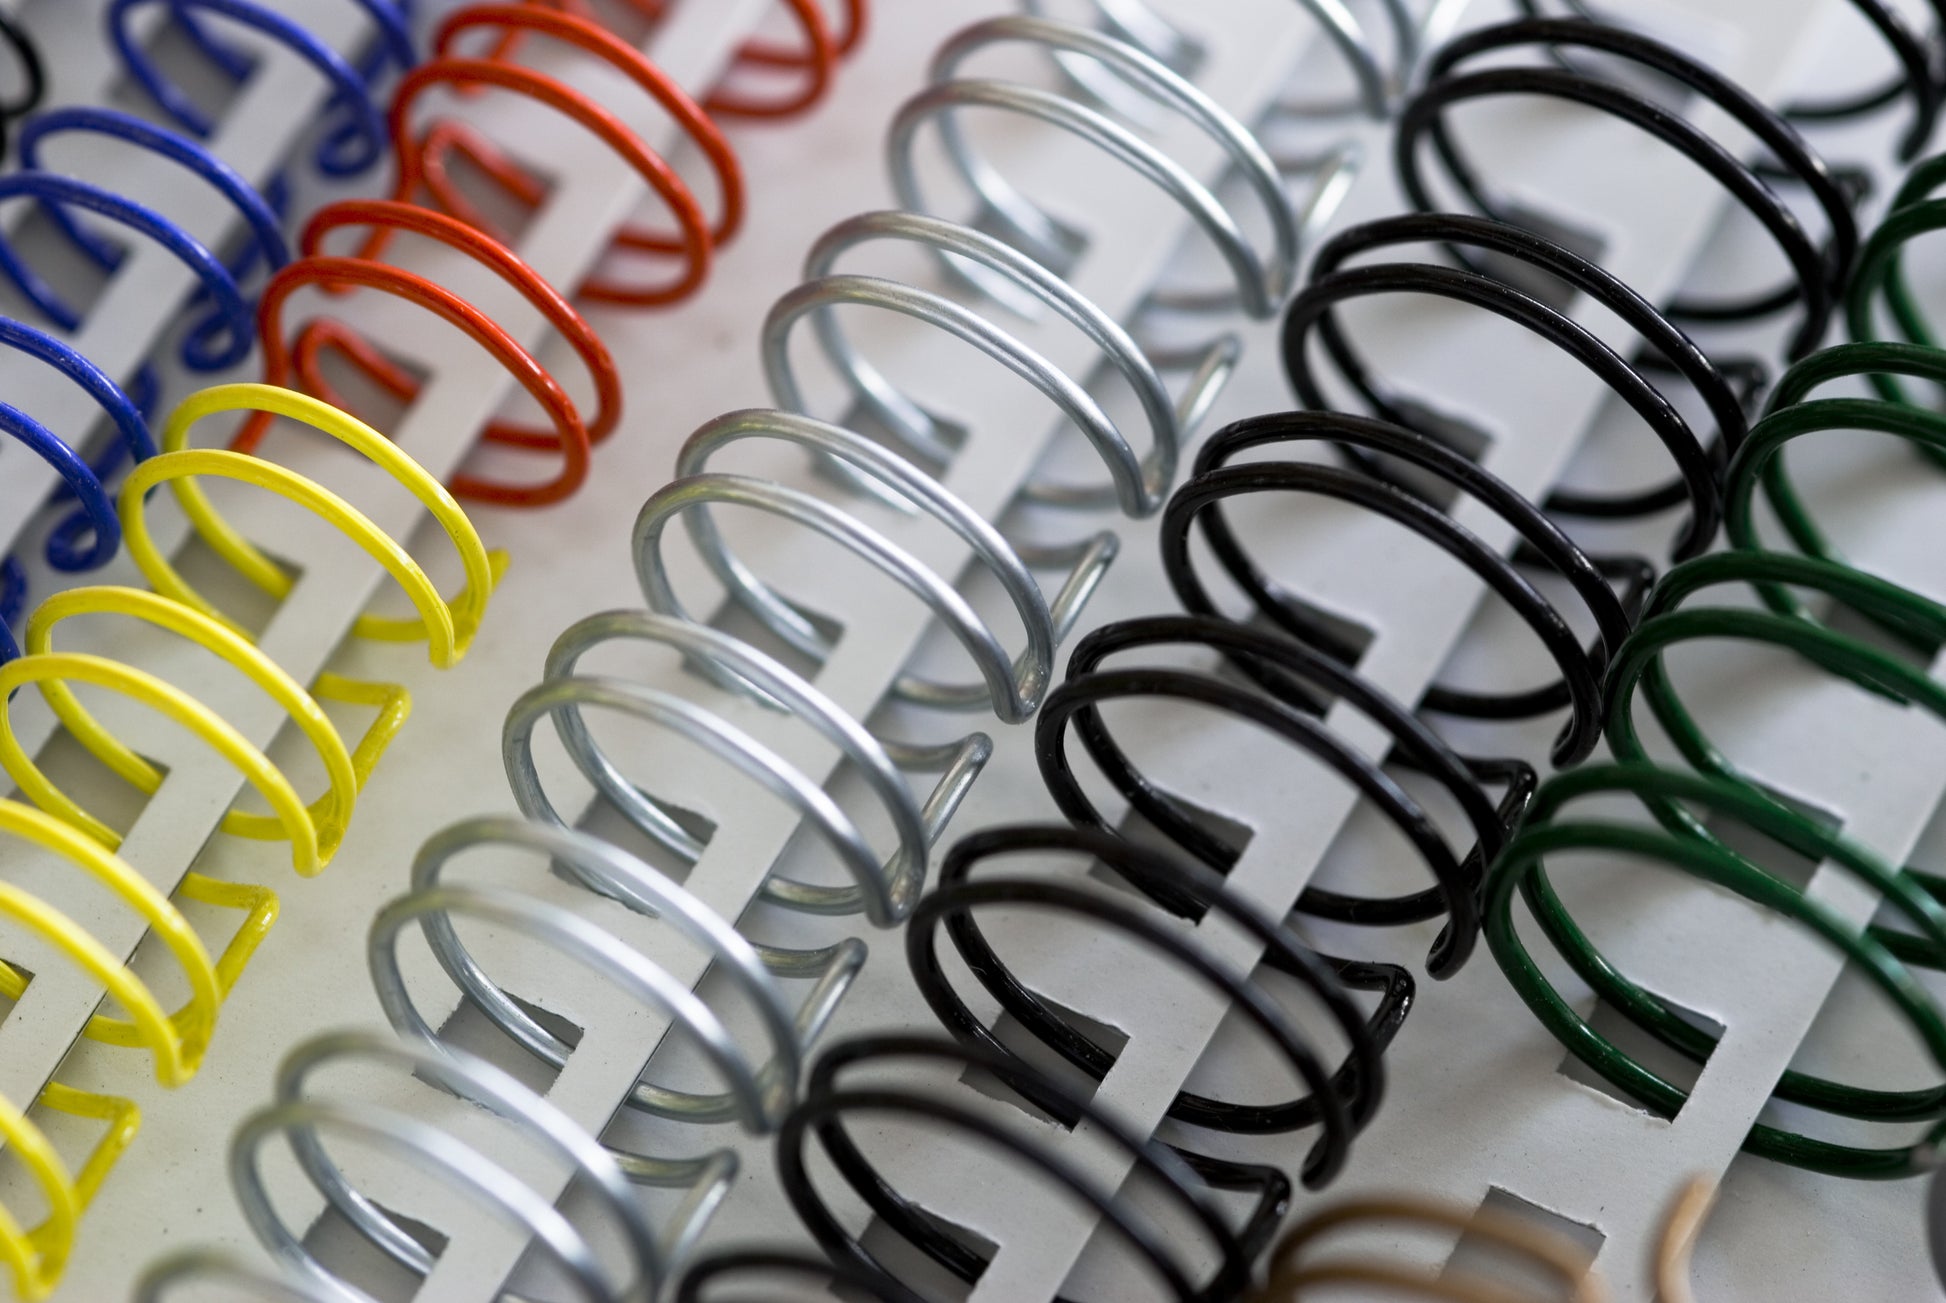 Picture of wire coils used for wire binding of reports and dissertations